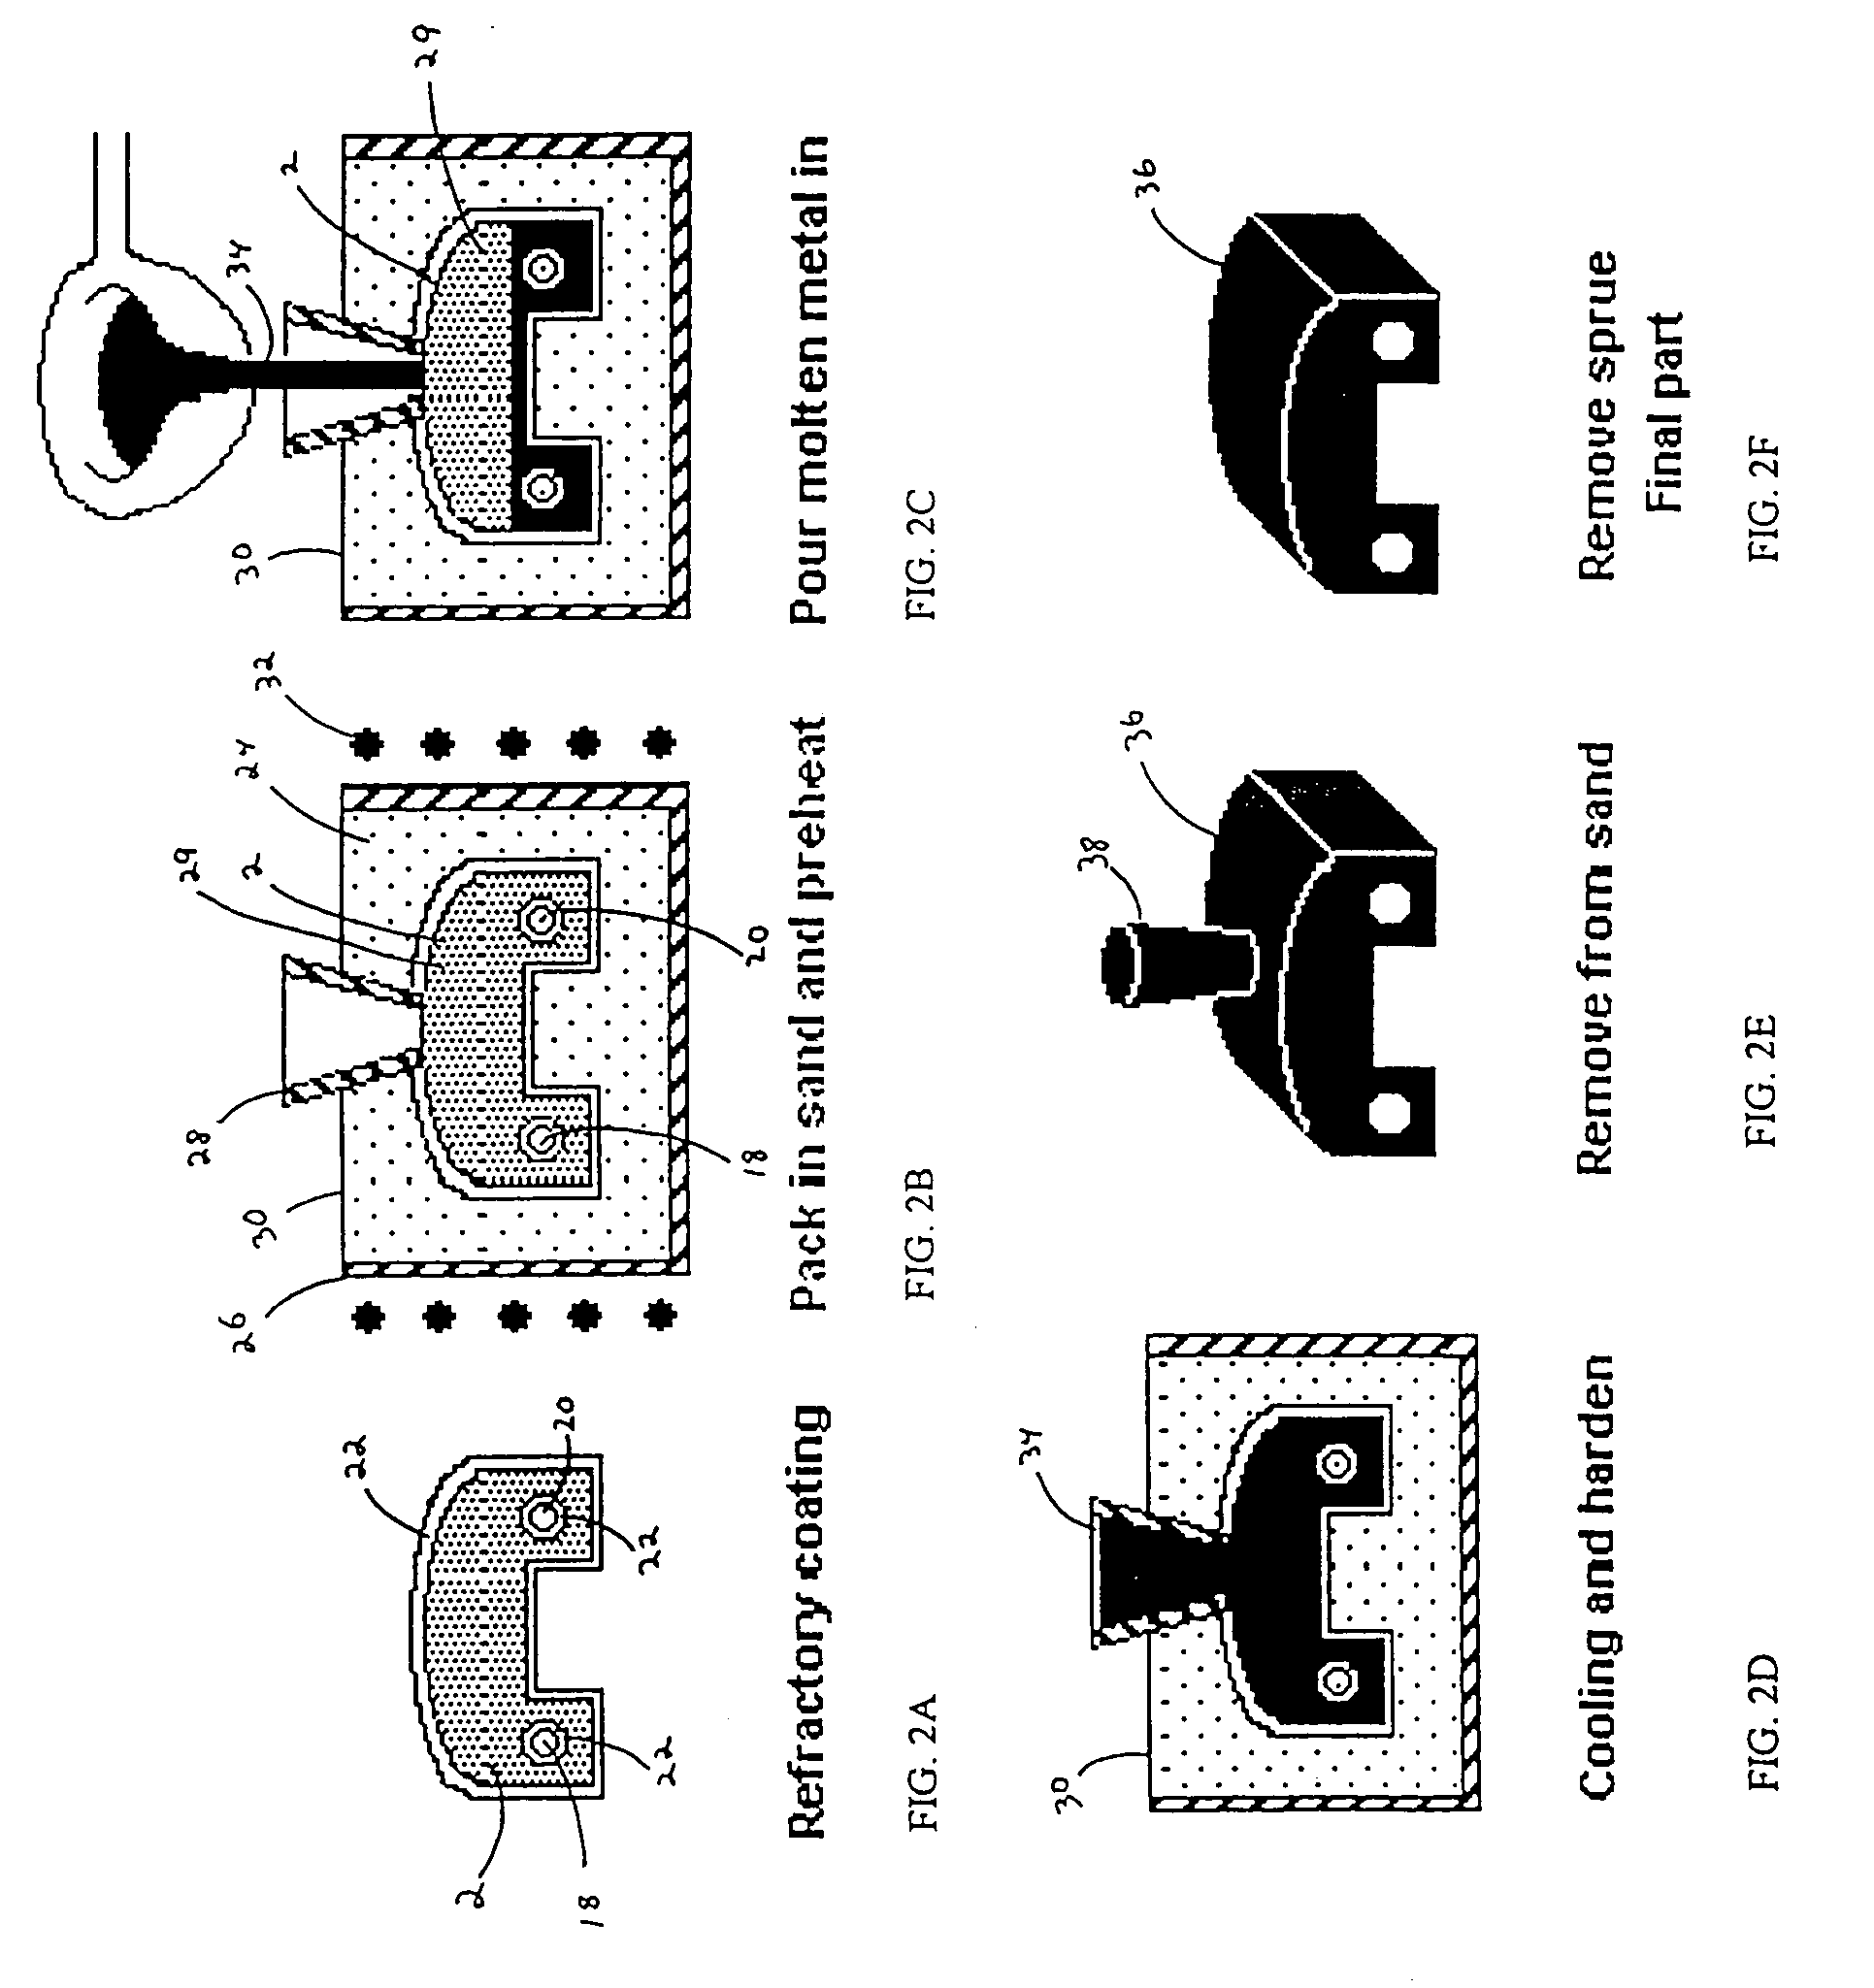 Novel casting process and articles for performing same